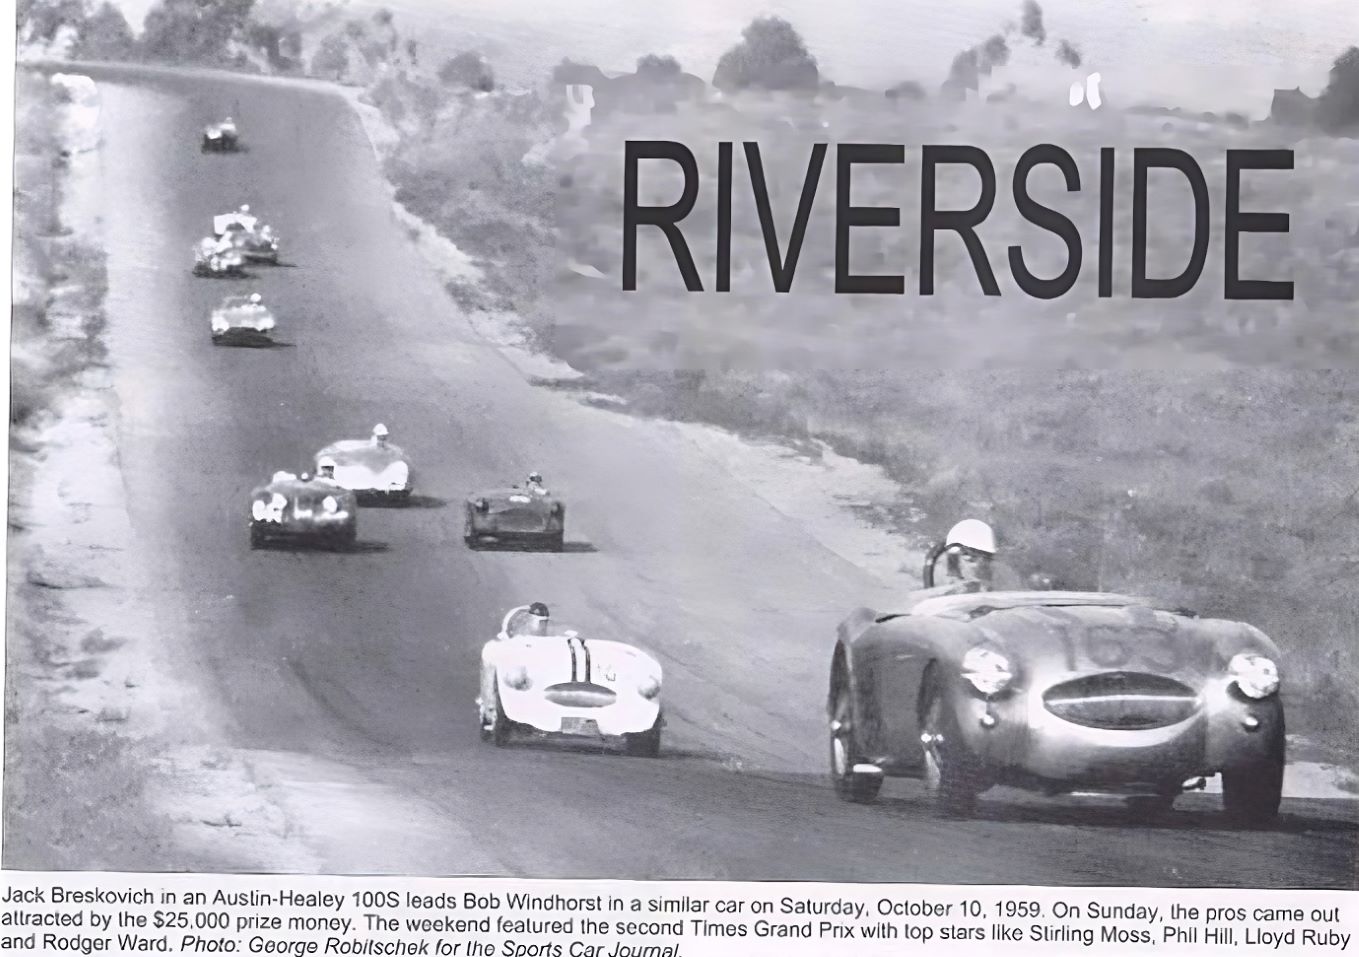 Name:  AH 100S #401 AHS3709 Jack Beskovitch Riverside 3 hour race 1959 #163 w another 100S 174 kb arch .jpg
Views: 186
Size:  173.6 KB